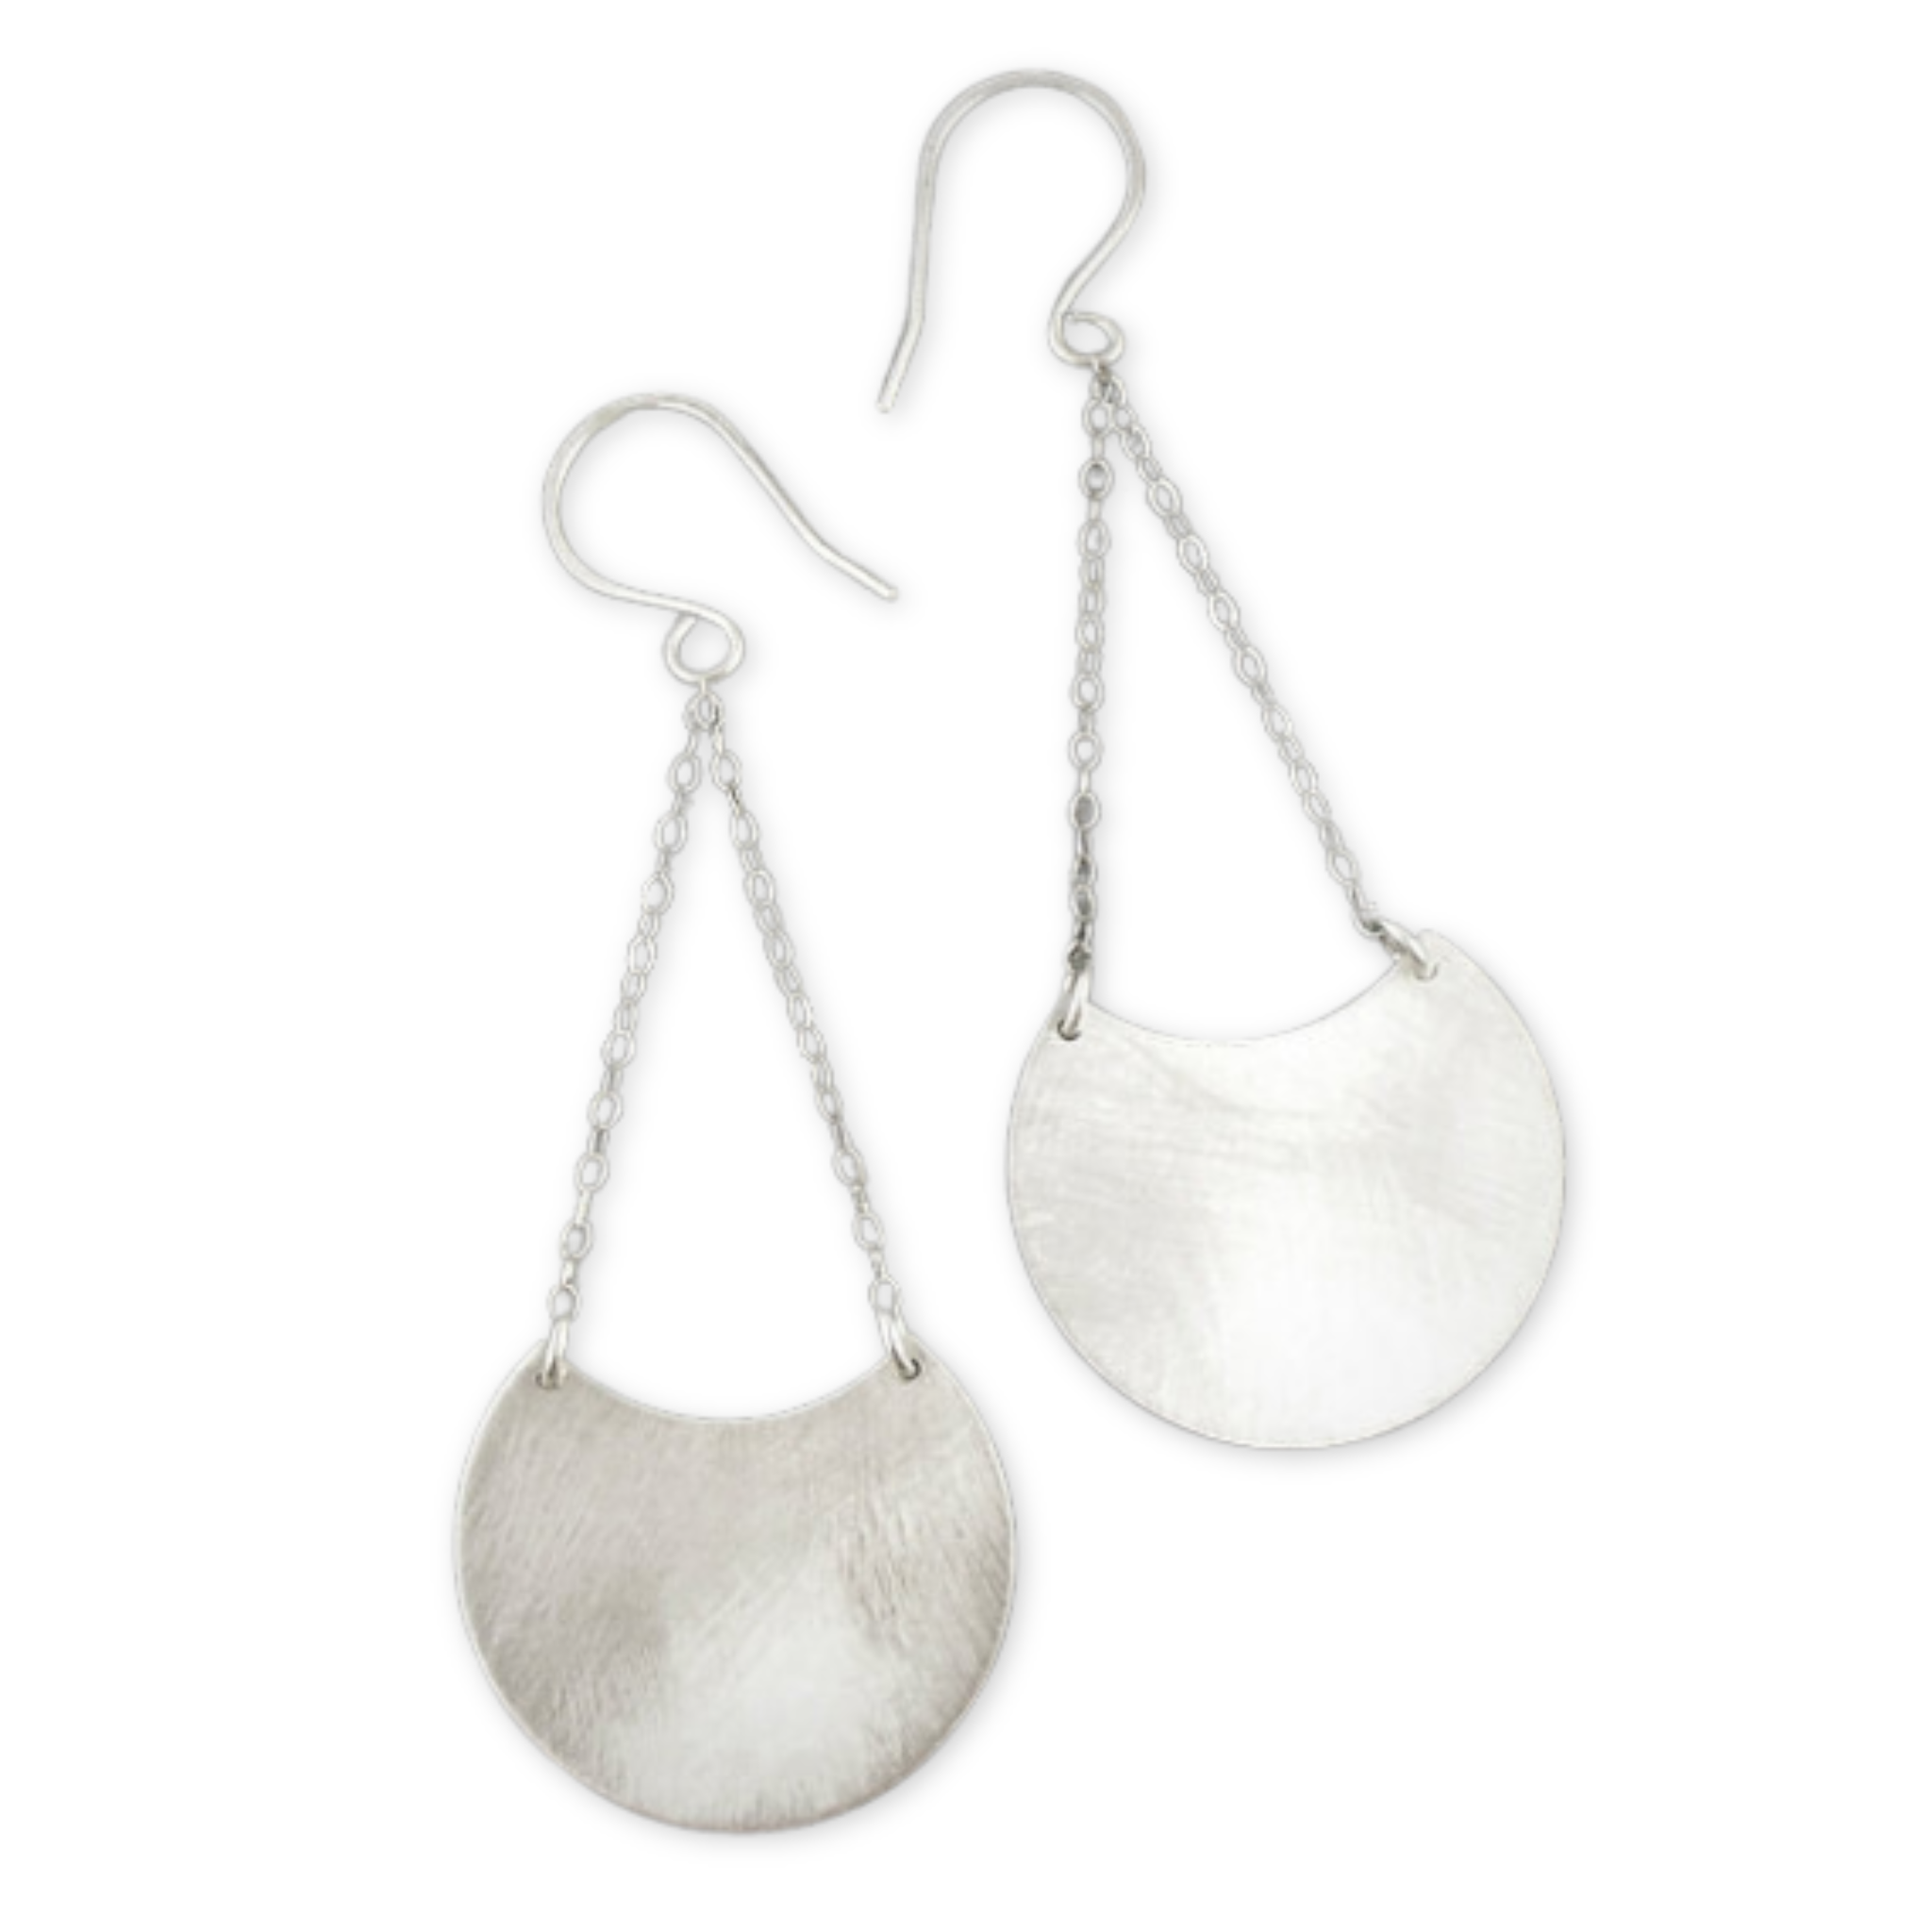 dangle earrings with half moon shape hanging from sterling silver chain